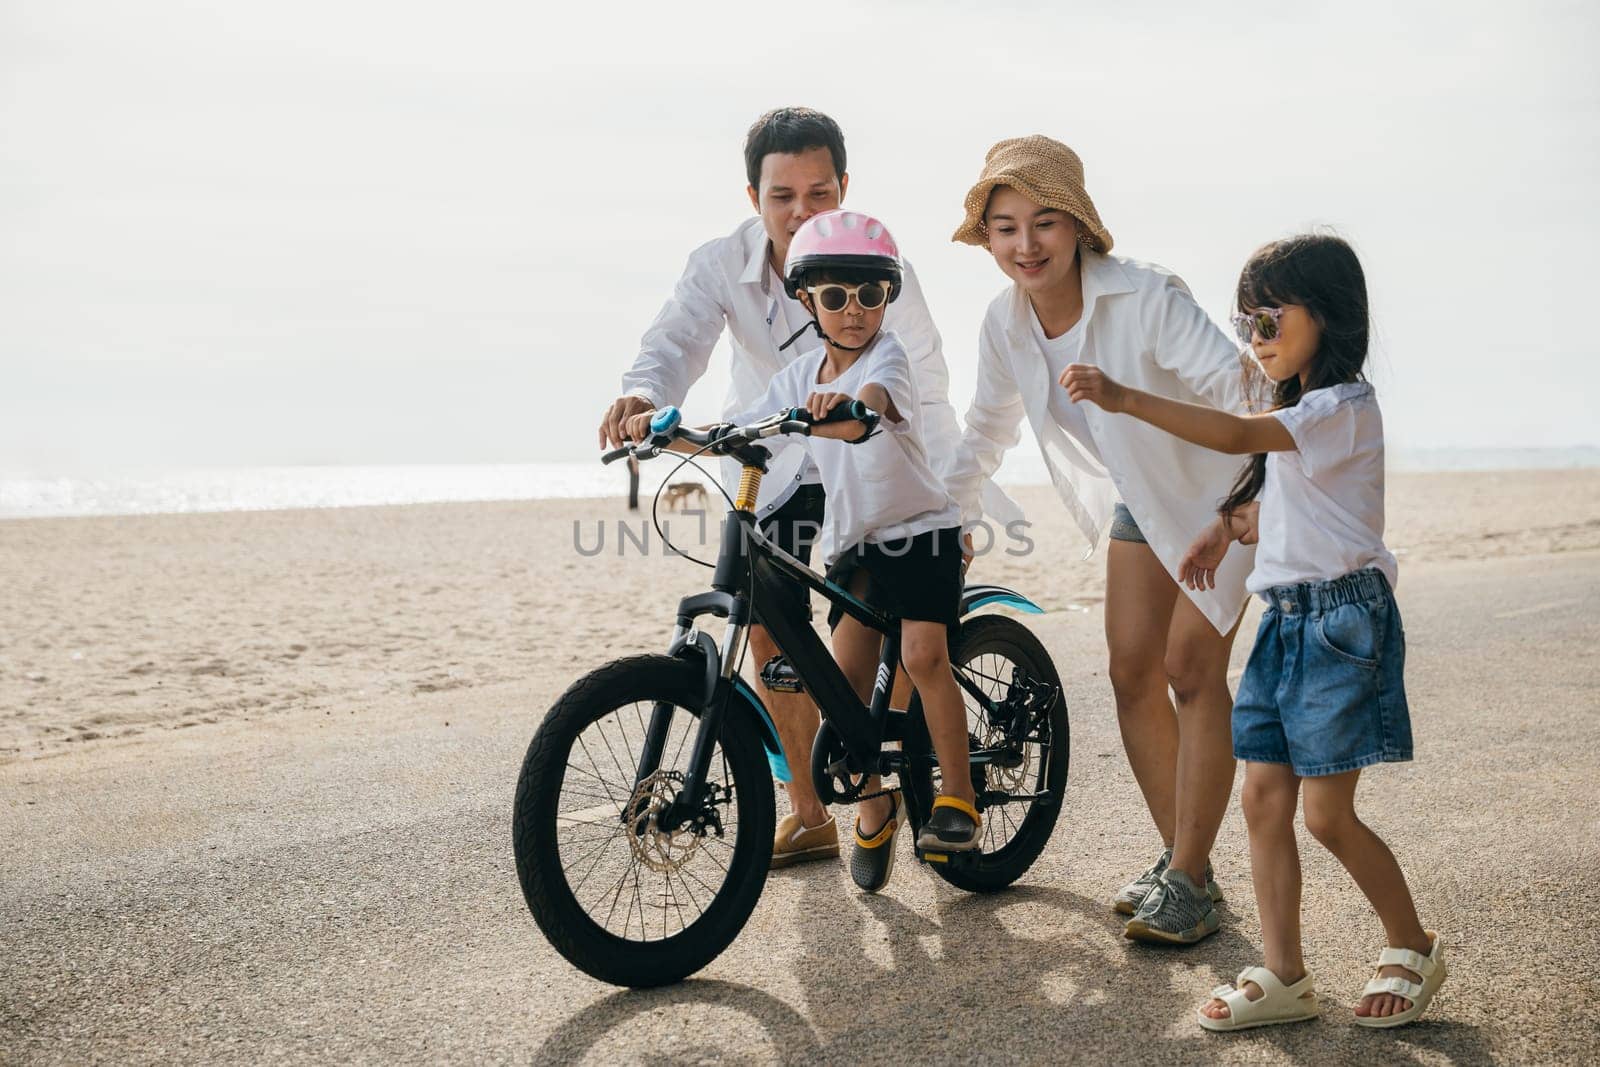 Family fun under summer sun: Parents happily teach their children to ride bicycles on sandy beach near sea. Laughter safety helmets and freedom of cycling make this joyful and memorable moment.